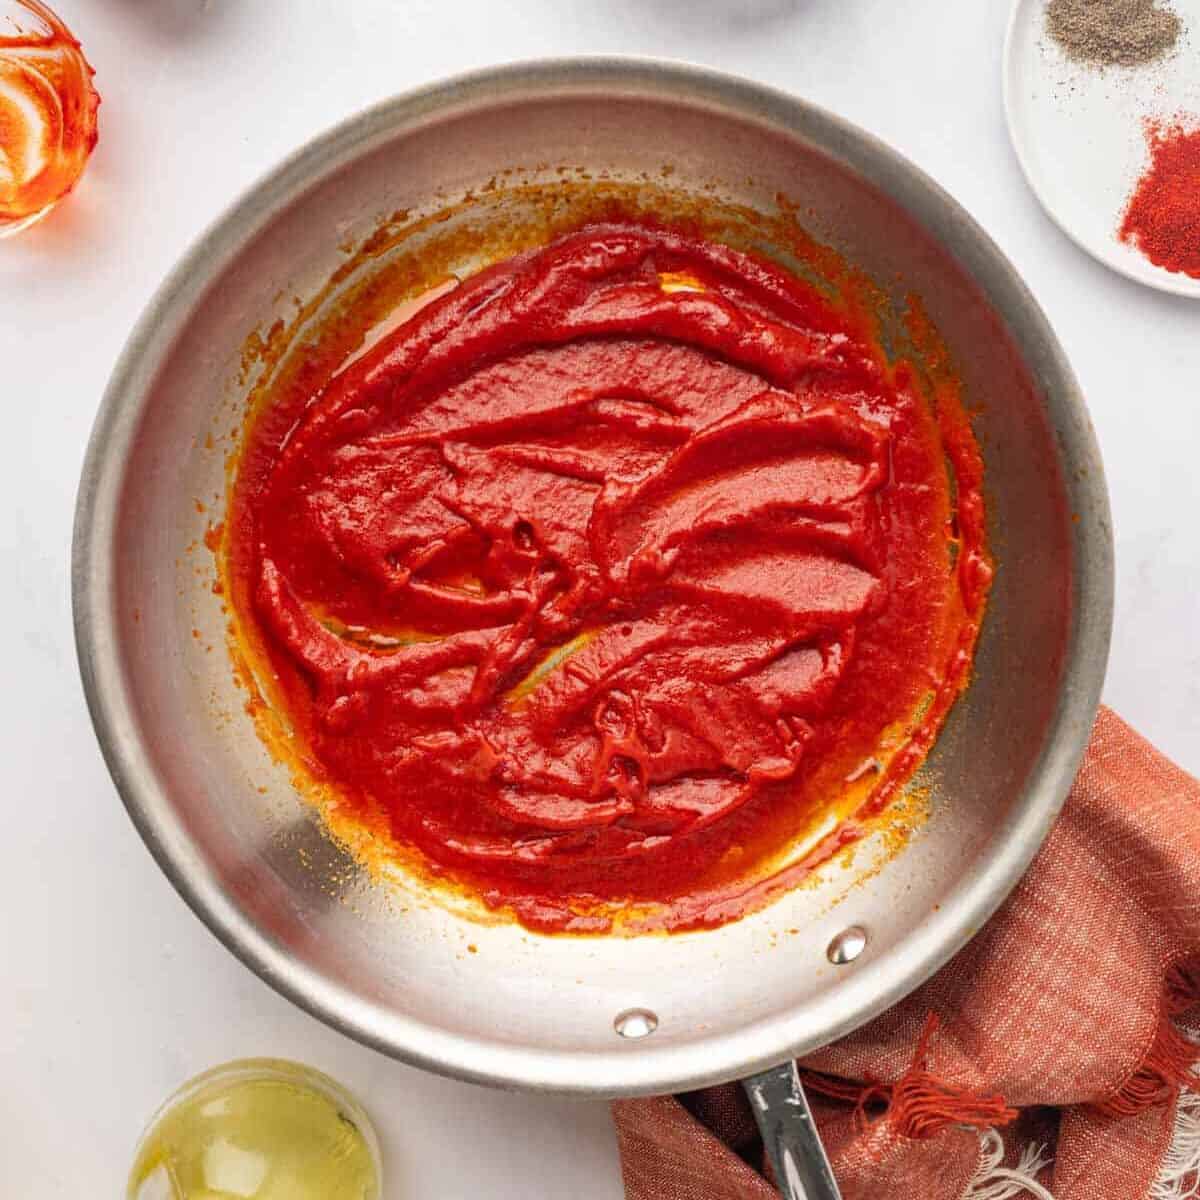 Tomato paste mixture cooked in a pan.